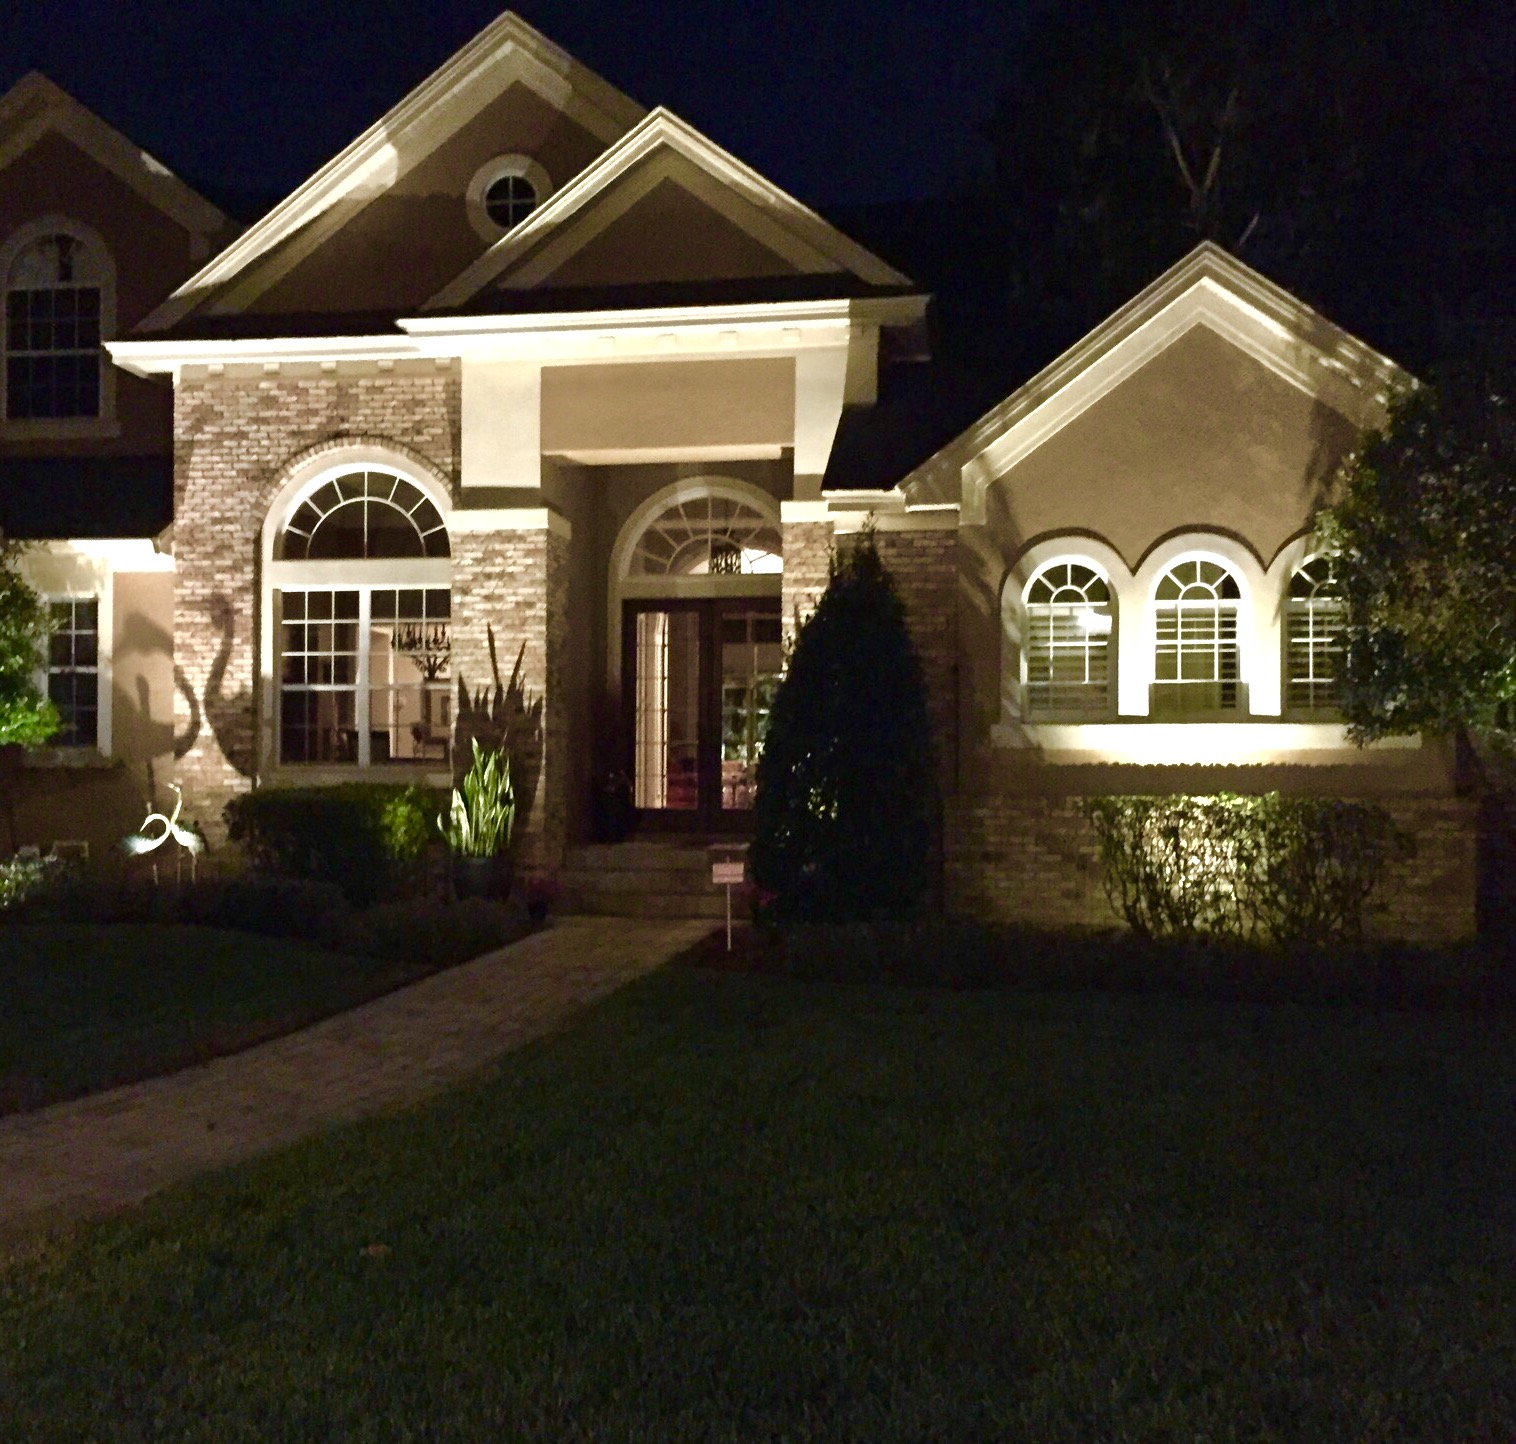 Illuminate Your Orlando Oasis. Contact Us Today!